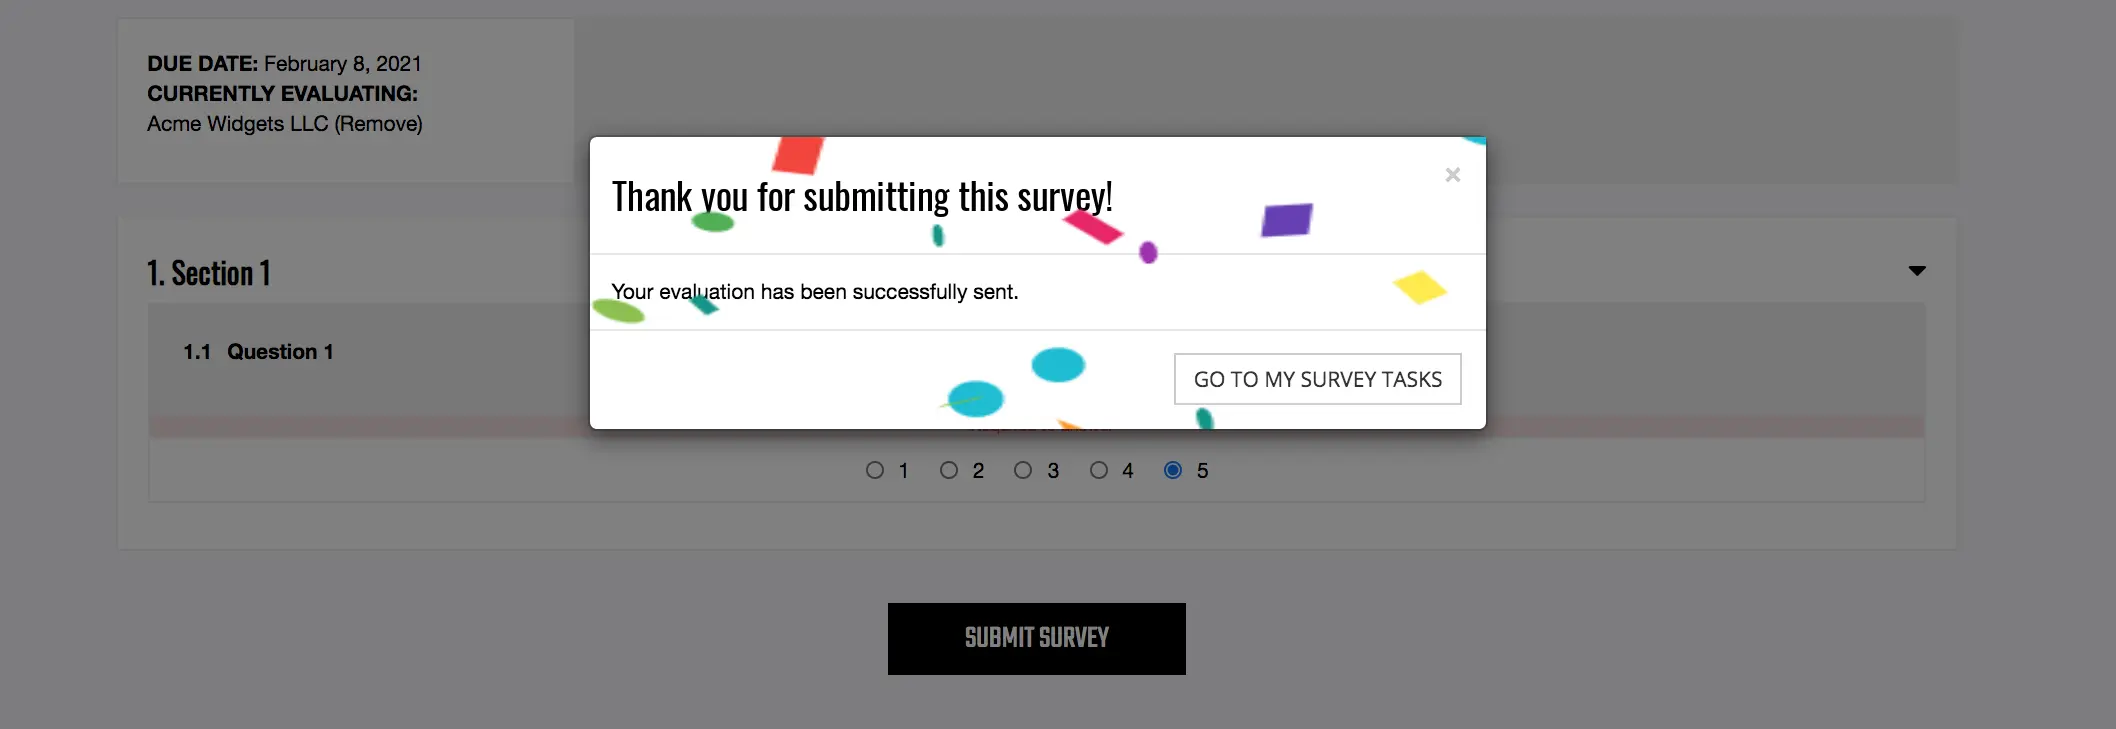 Confetti on Survey Completion